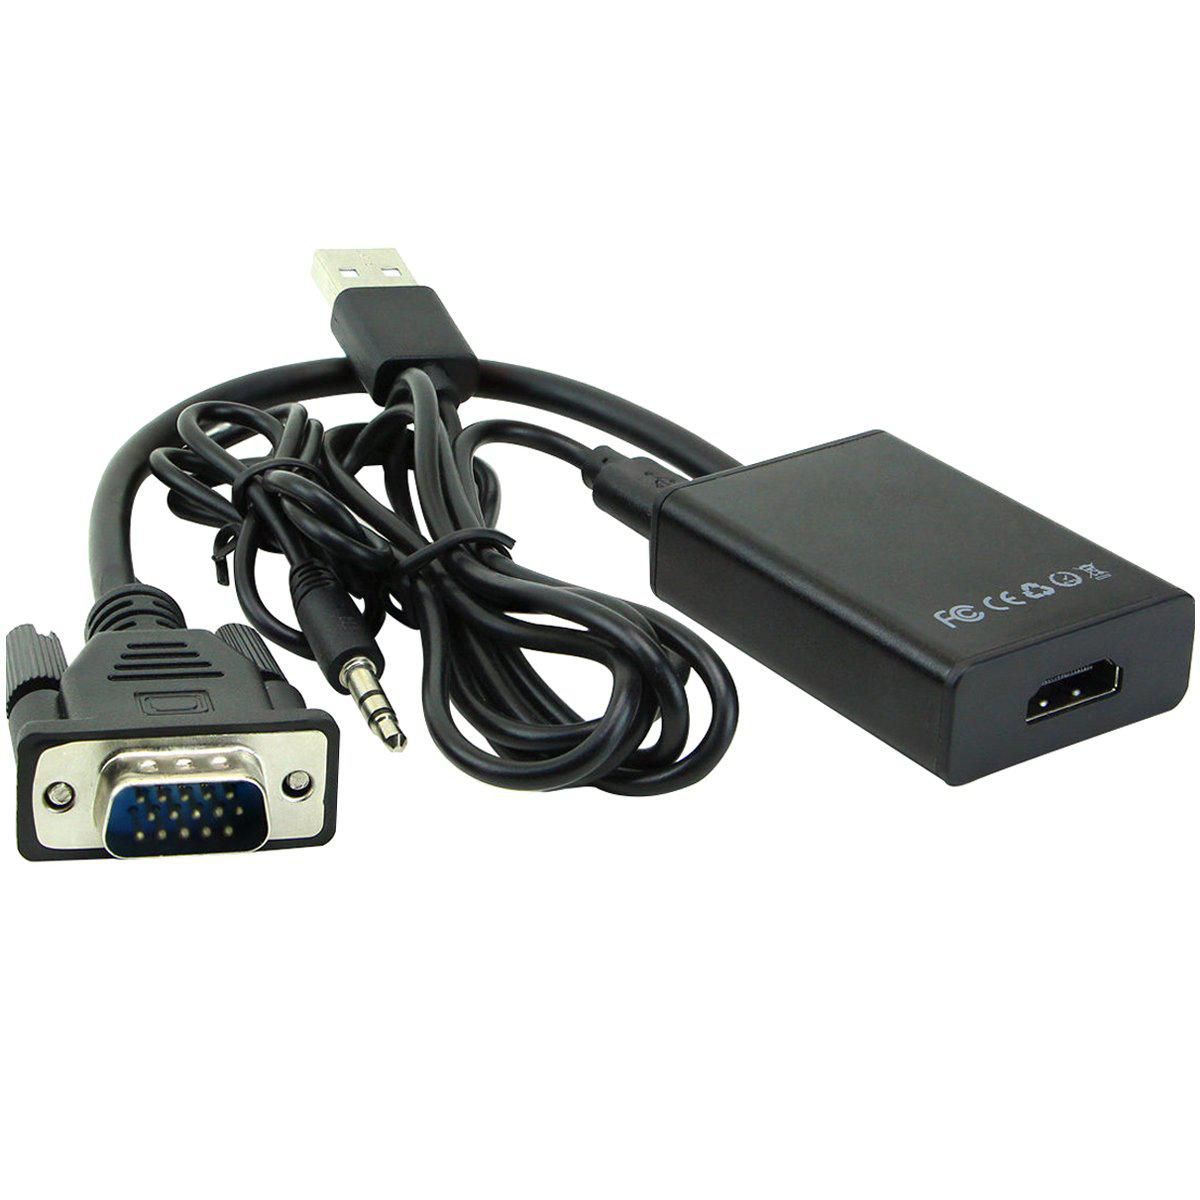 Vga To Hdmi Converter With USB Power And Audio